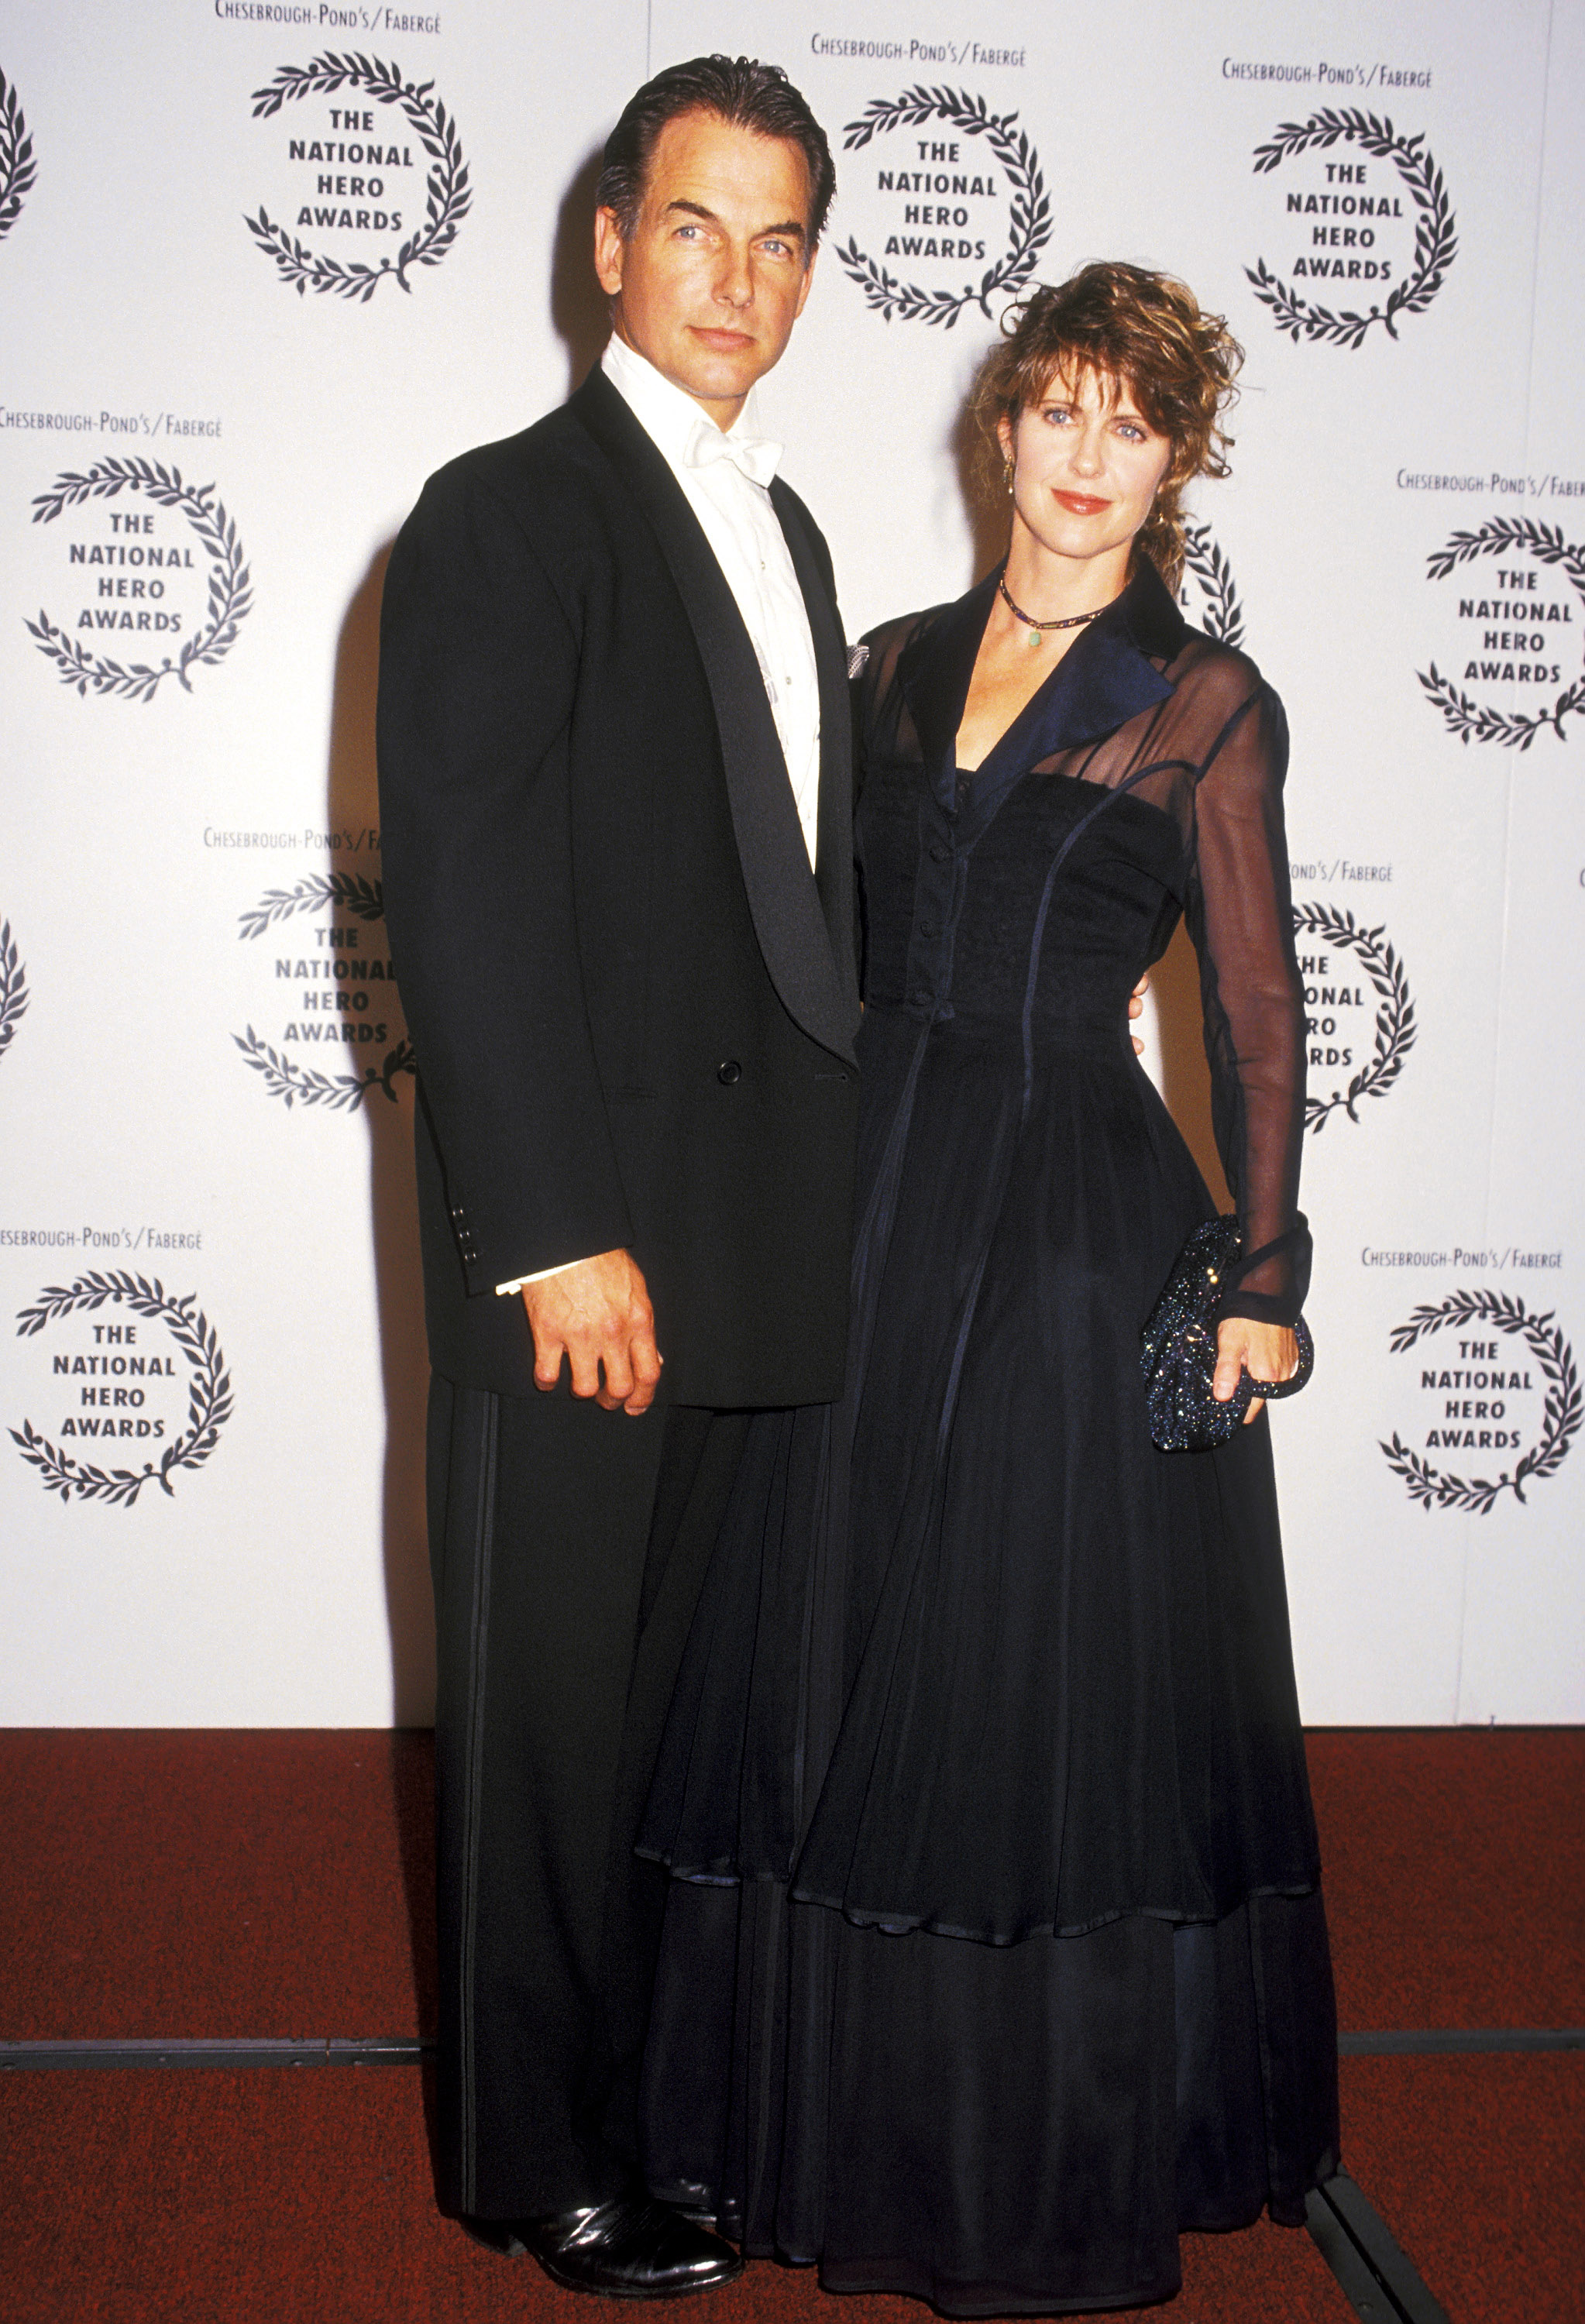 Mark Harmon and Pam Dawber at the National Hero Awards in 1994 | Source: Getty Images